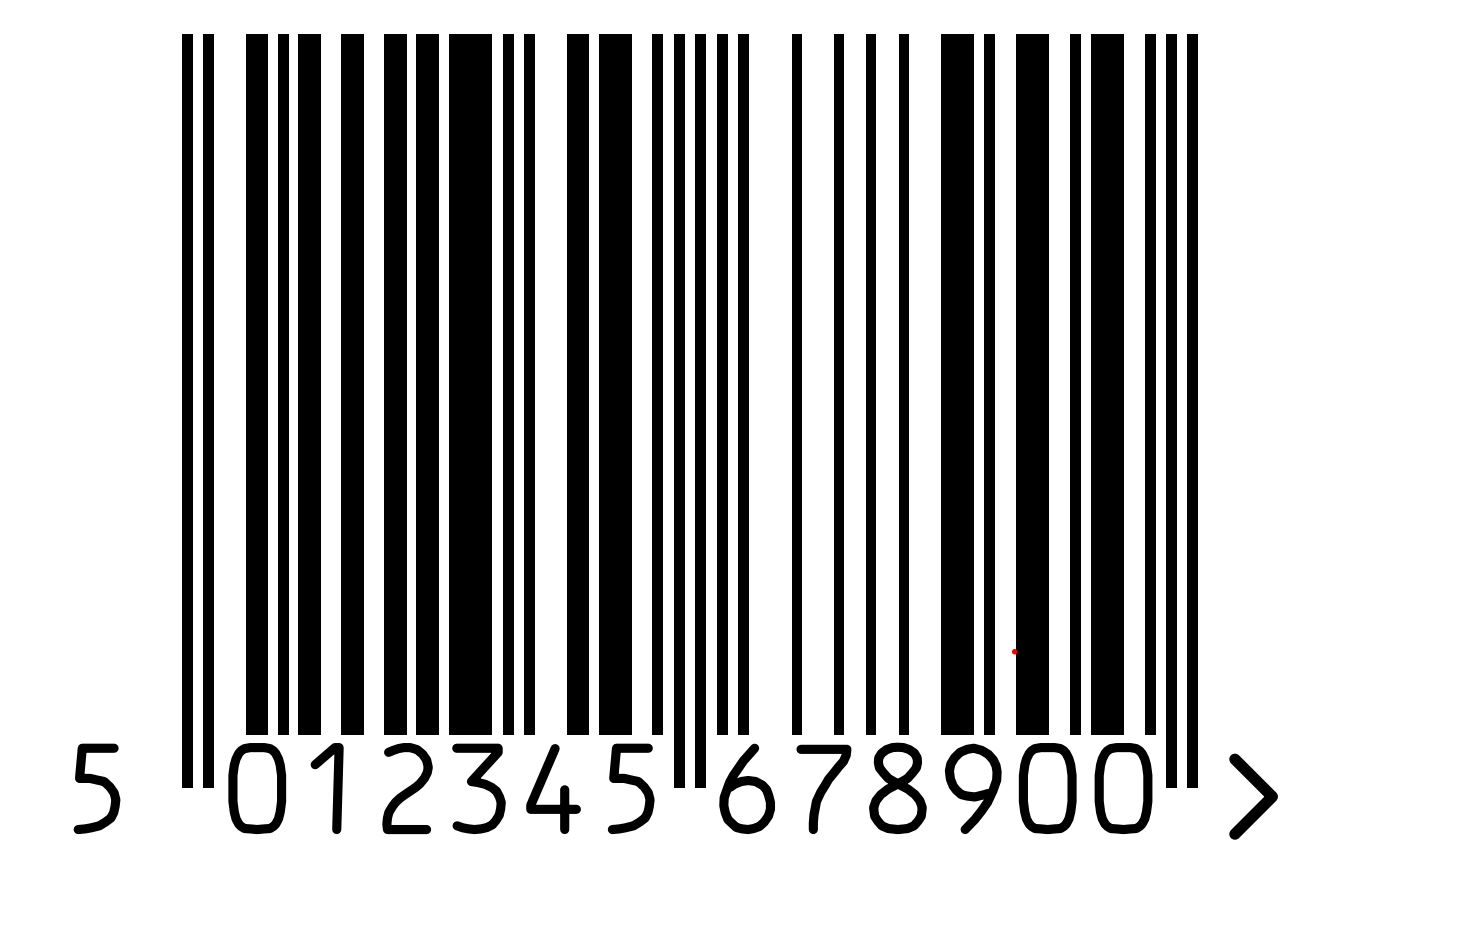 GS1 UK | Barcodes for your cases